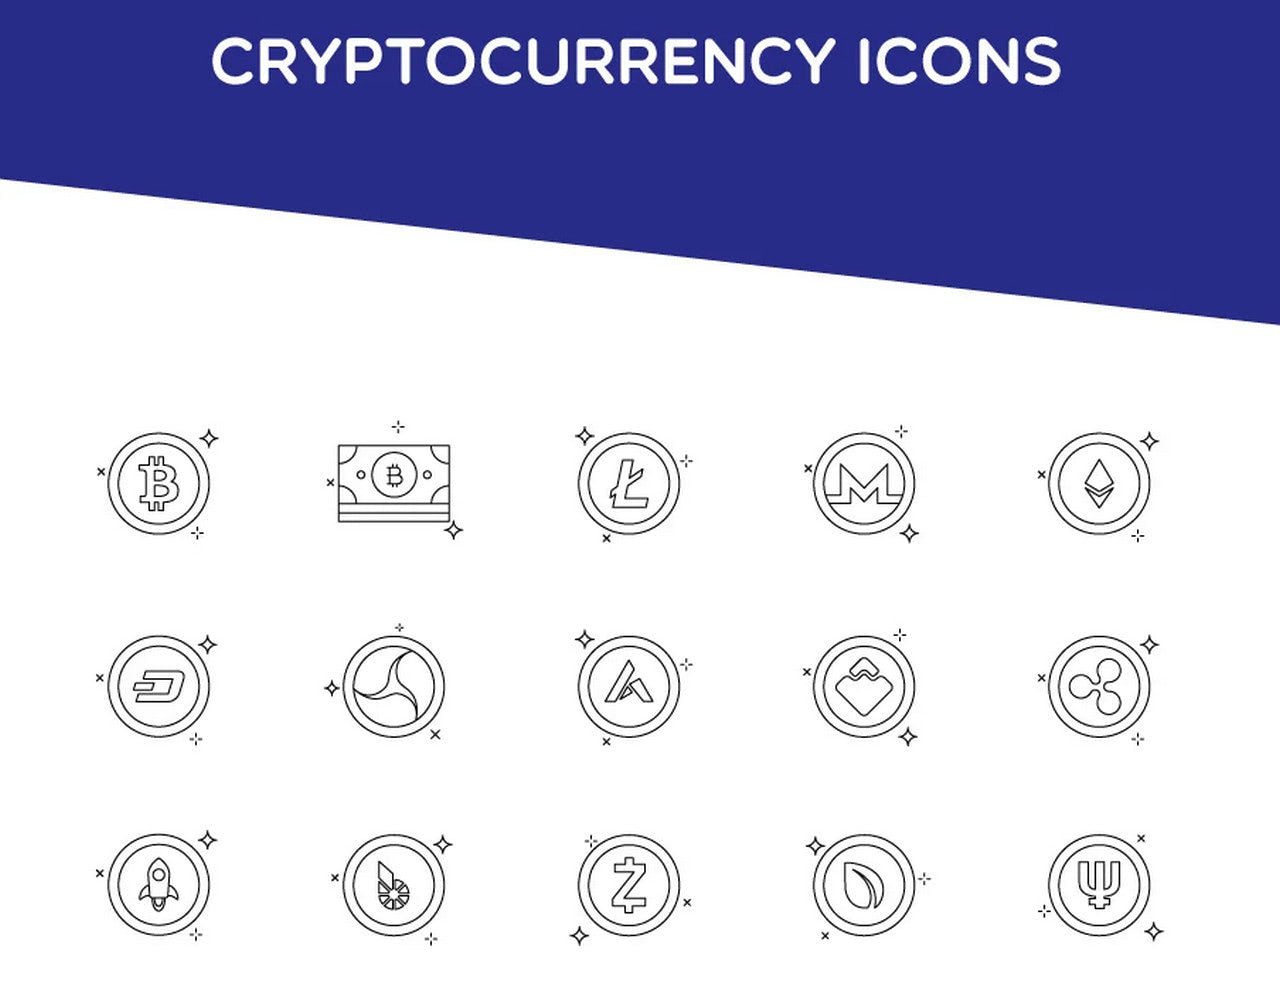 Top 100 Cryptocurrency Icons - Blockchain by Steven Ankri